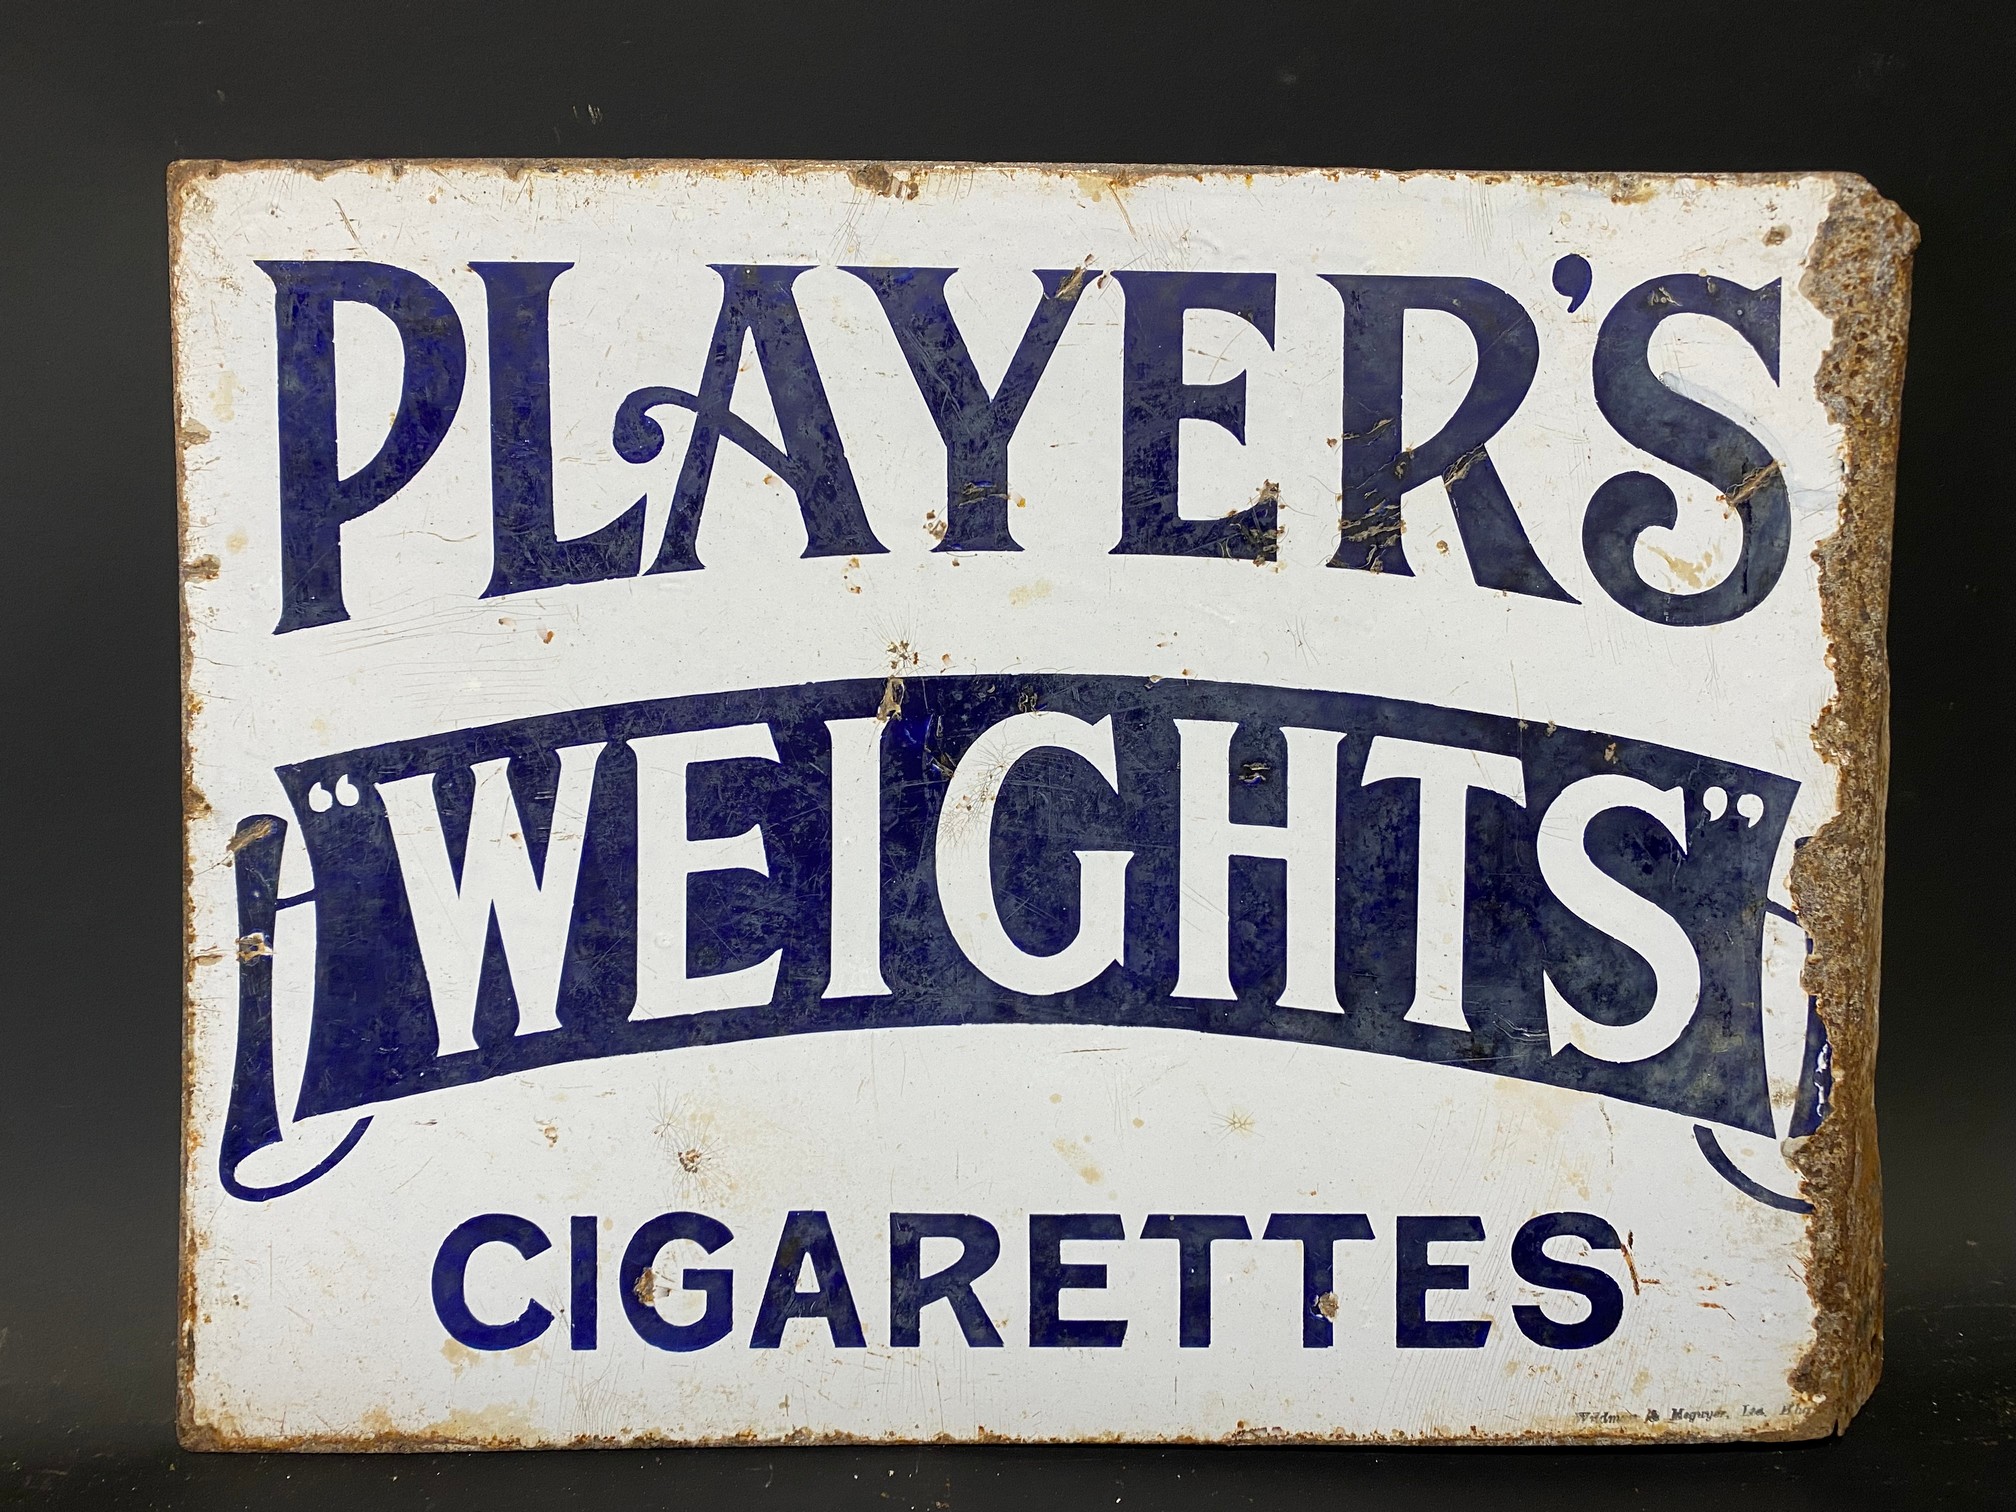 An early Player's Weights Cigarettes double sided enamel sign with hanging flange, by Wildman & - Image 5 of 6